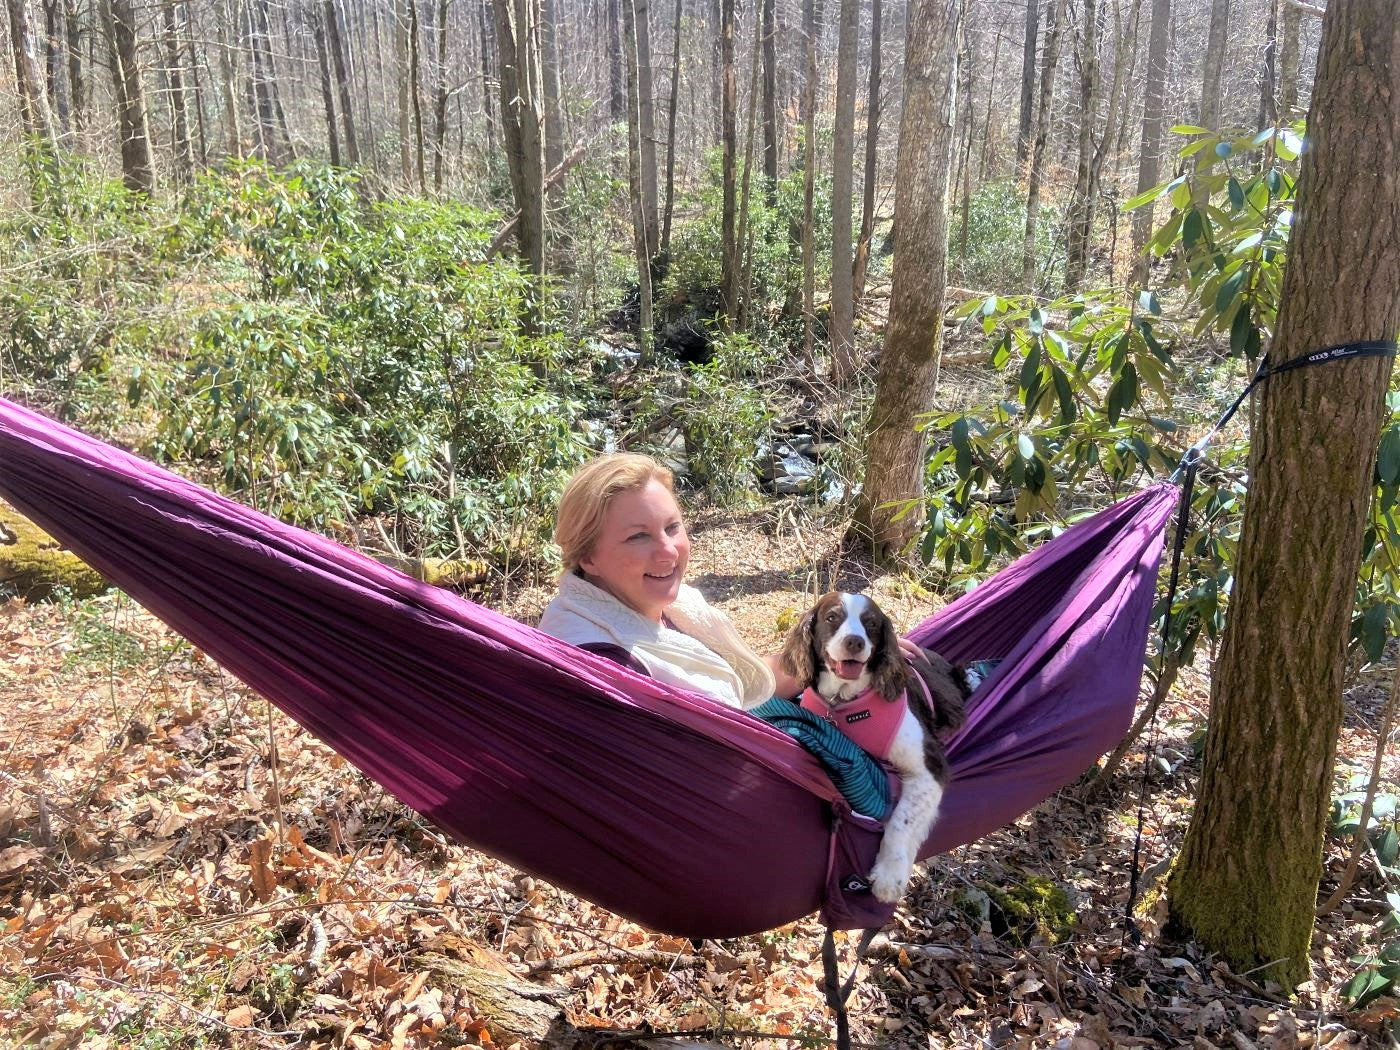 Woman and her dog hang in ENO DoubleNest hammock in WNC woods.  